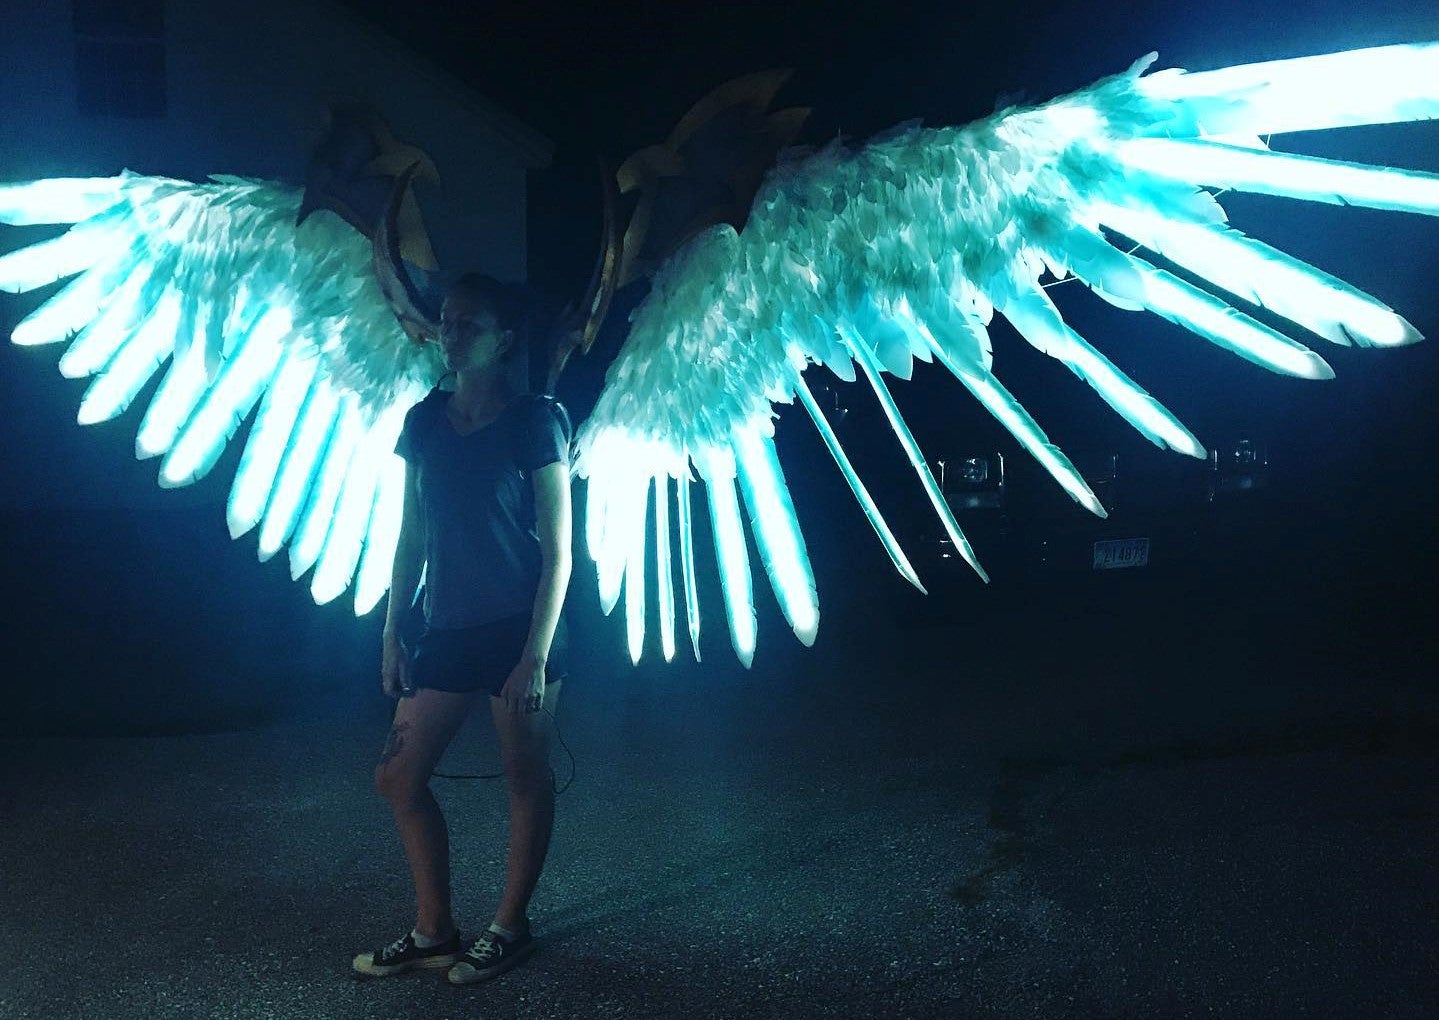 Plexi Cosplay's LED motorized wings for her Pride cosplay from Darksiders.